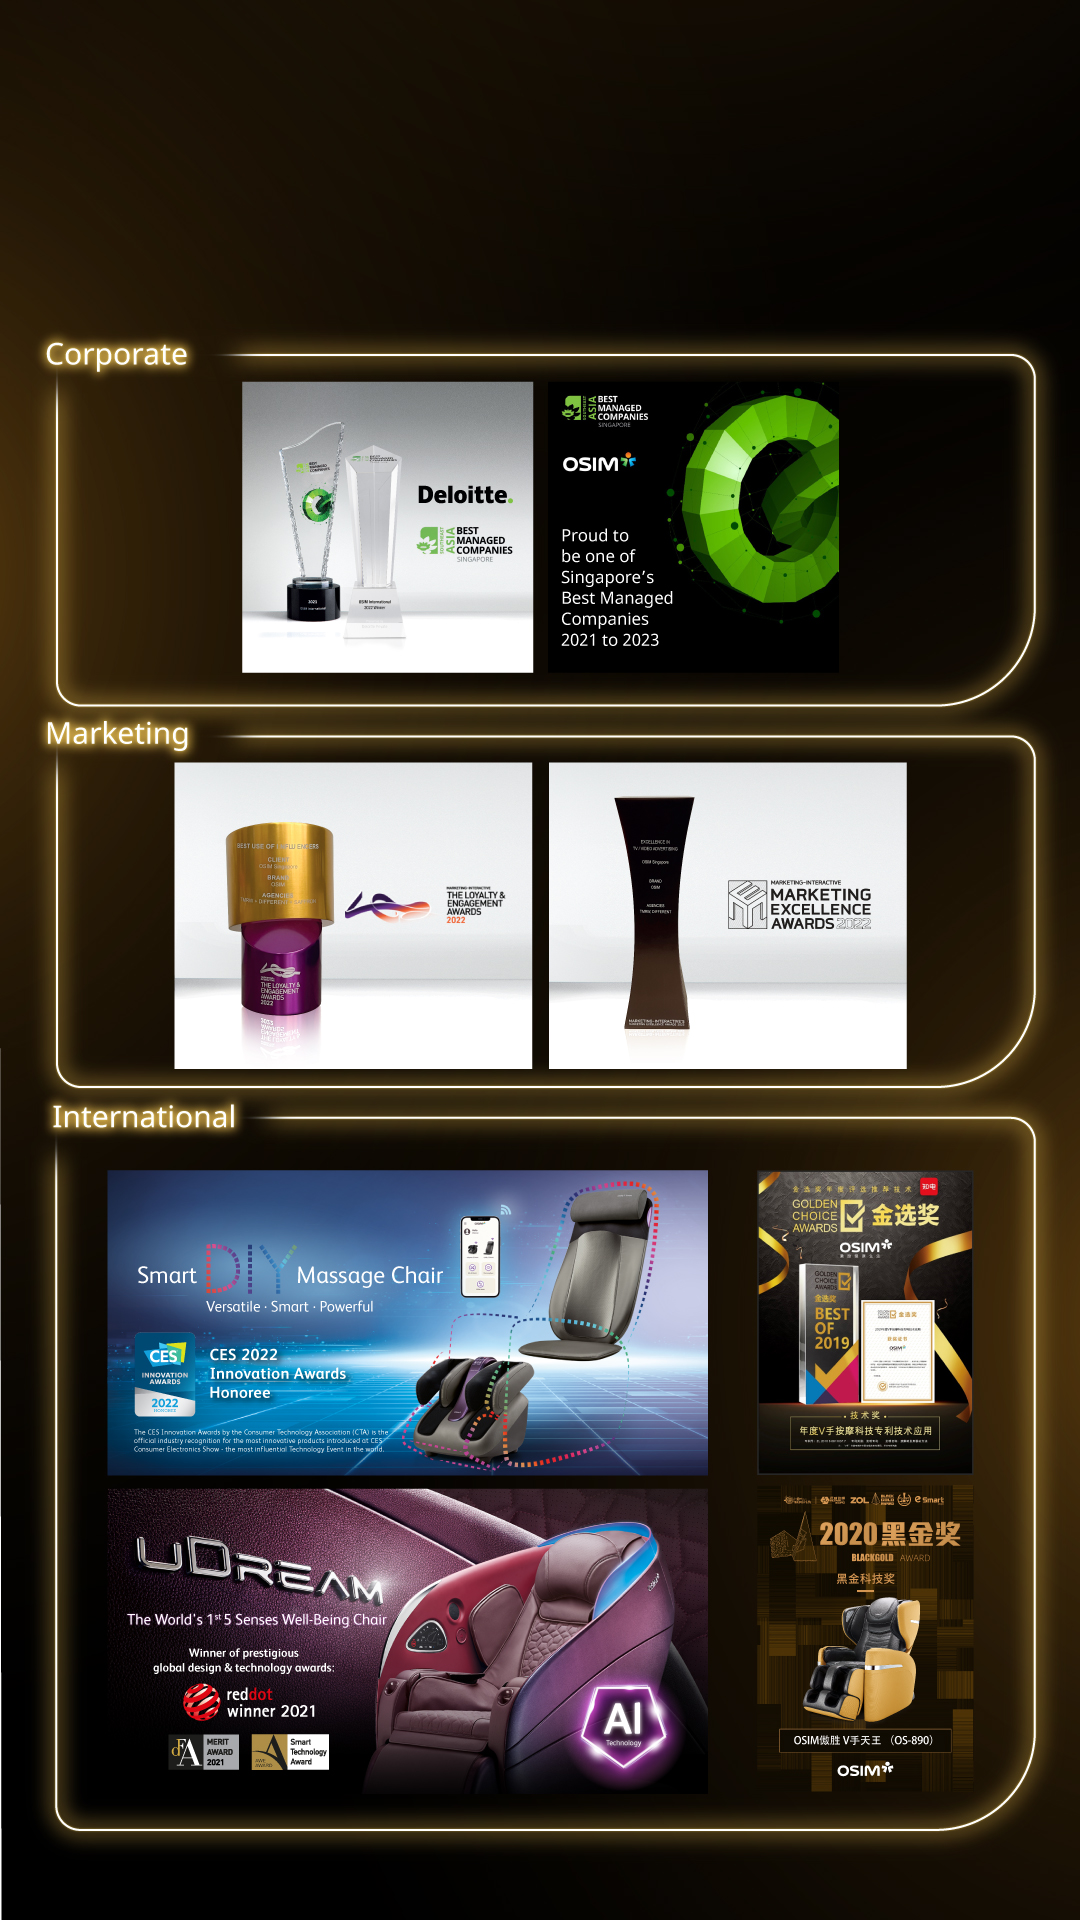 Brand and Product Awards